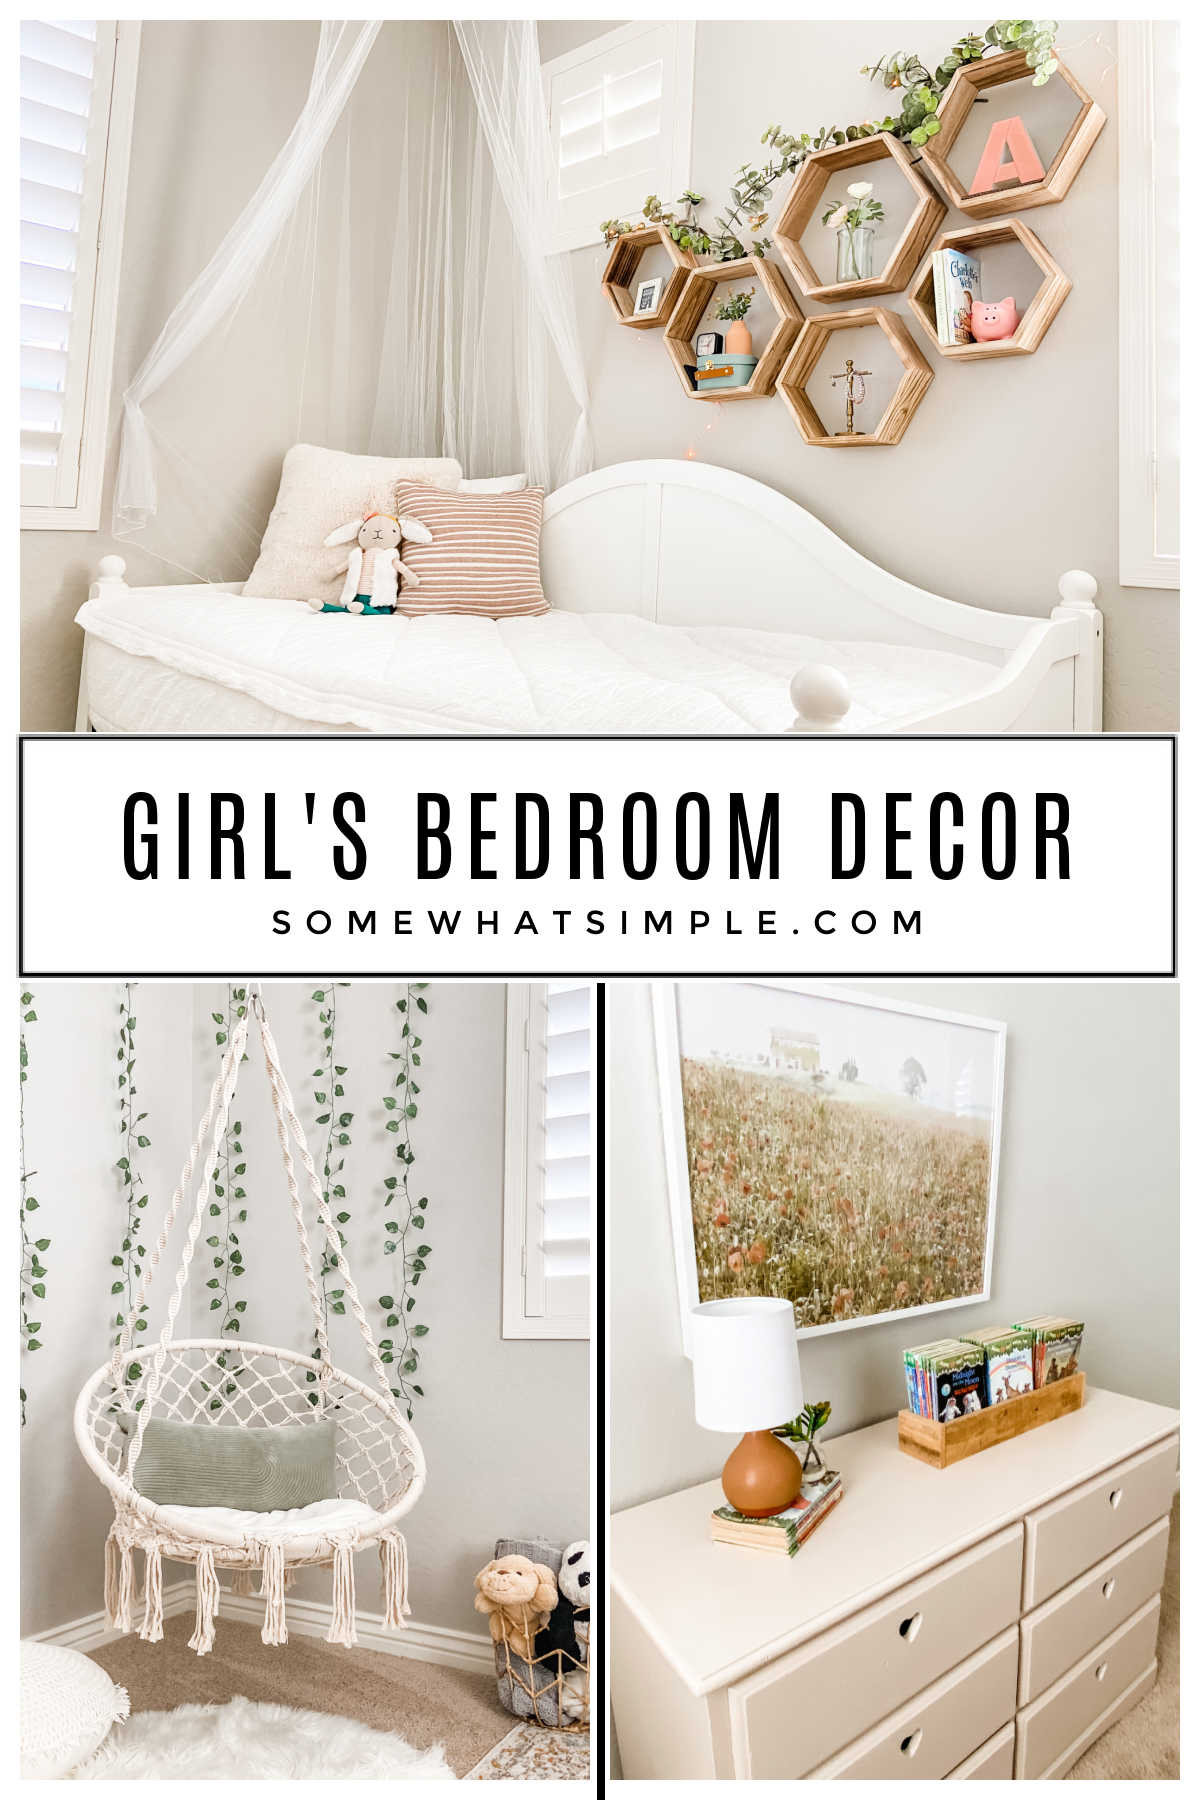 75 Best DIY Room Decor Ideas for Teens - DIY Projects for Teens